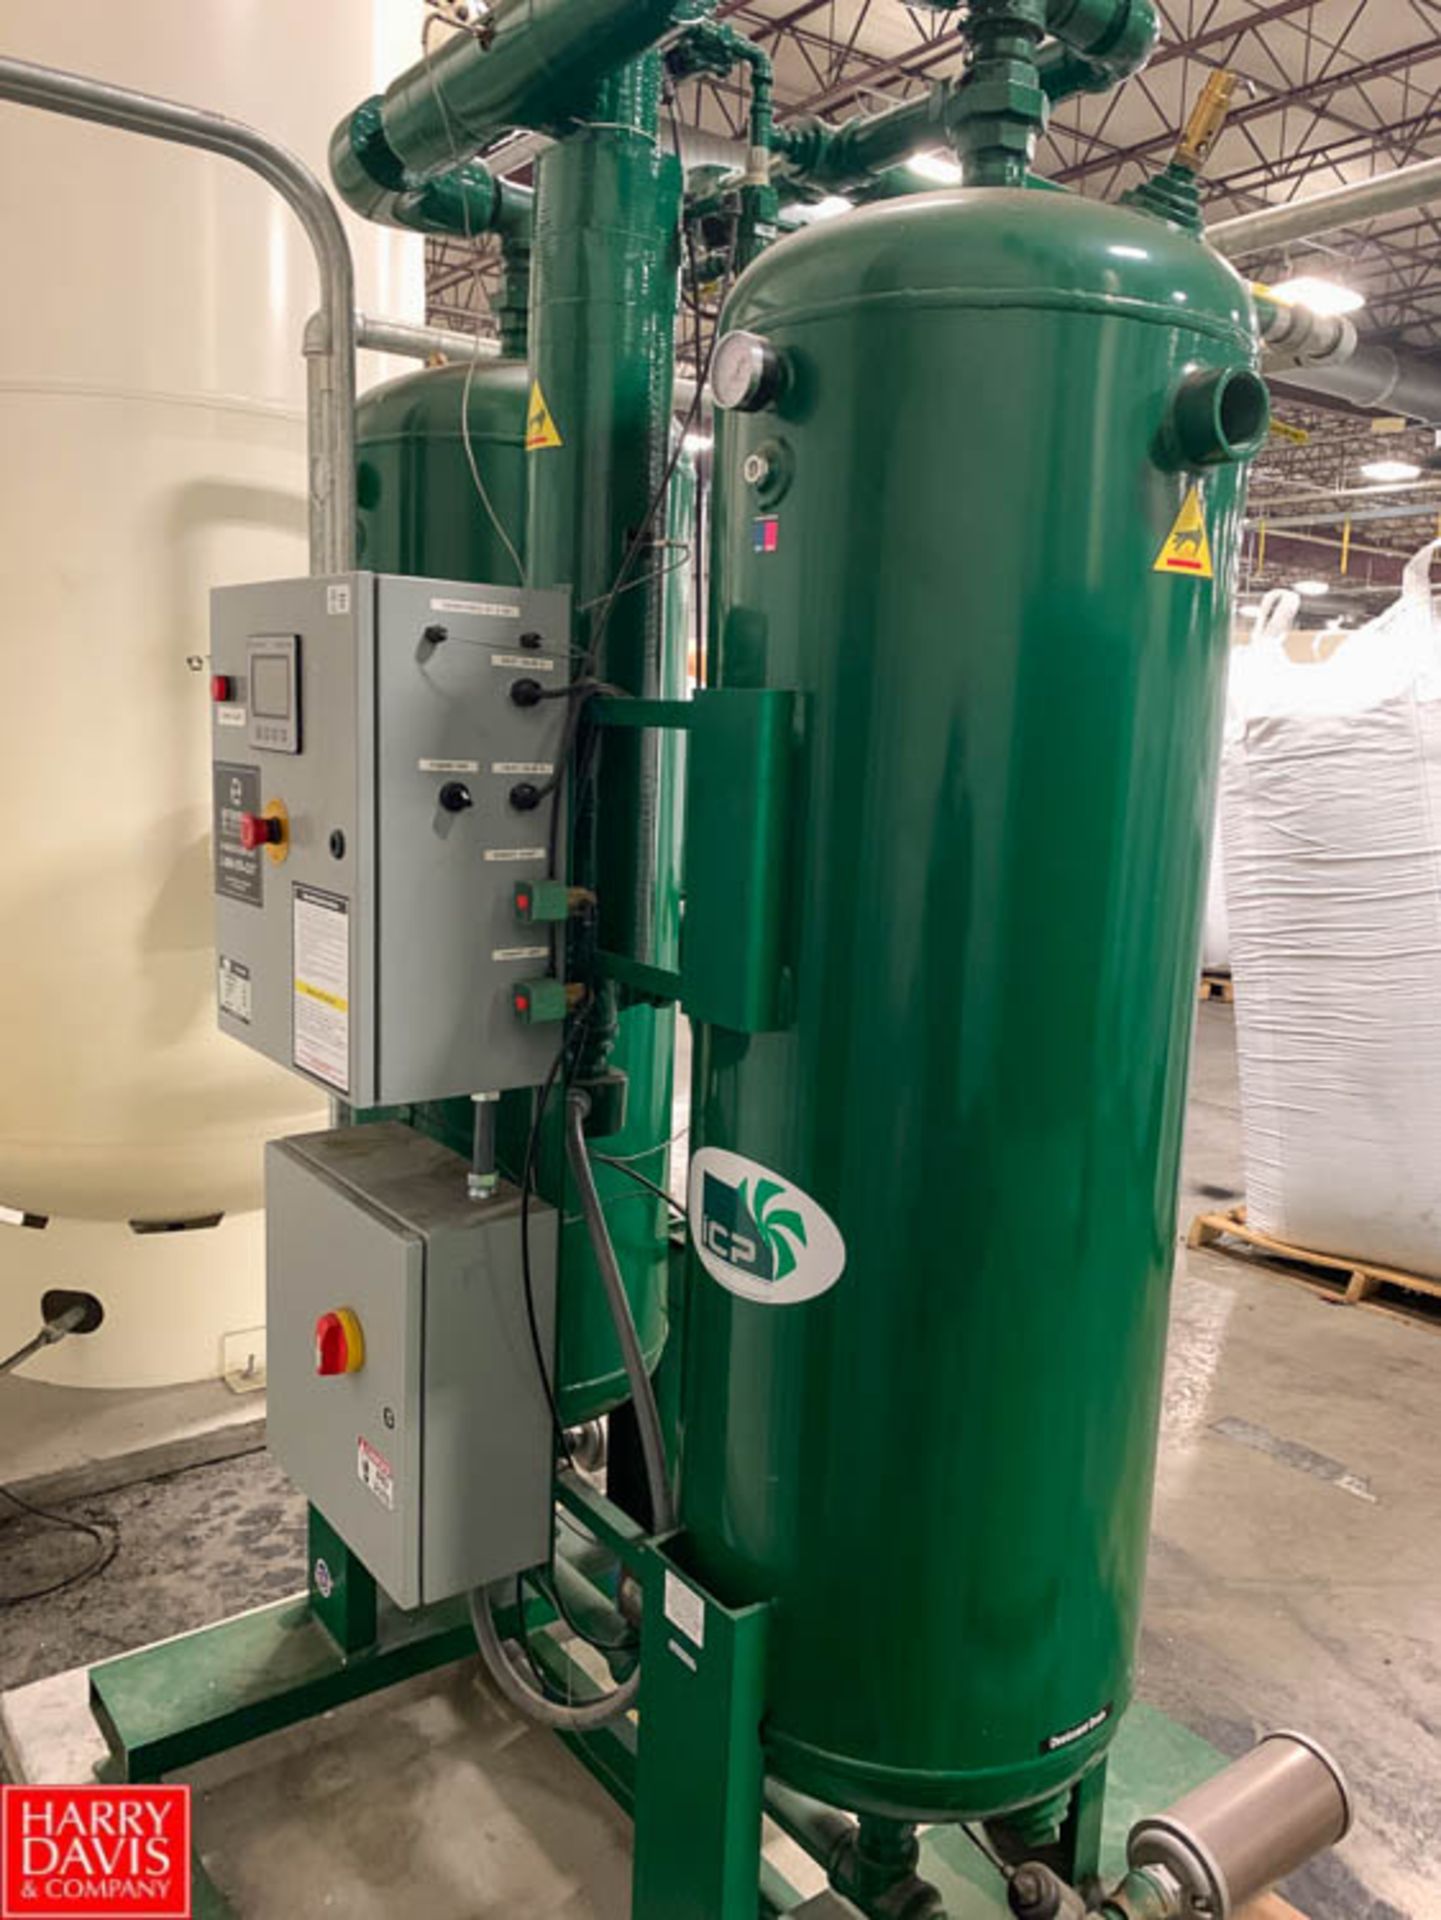 2016 ICP Compressions Air Dryer, Model IDHPE-550, S/N 2331563E, with Water Separator Rigging Fee: